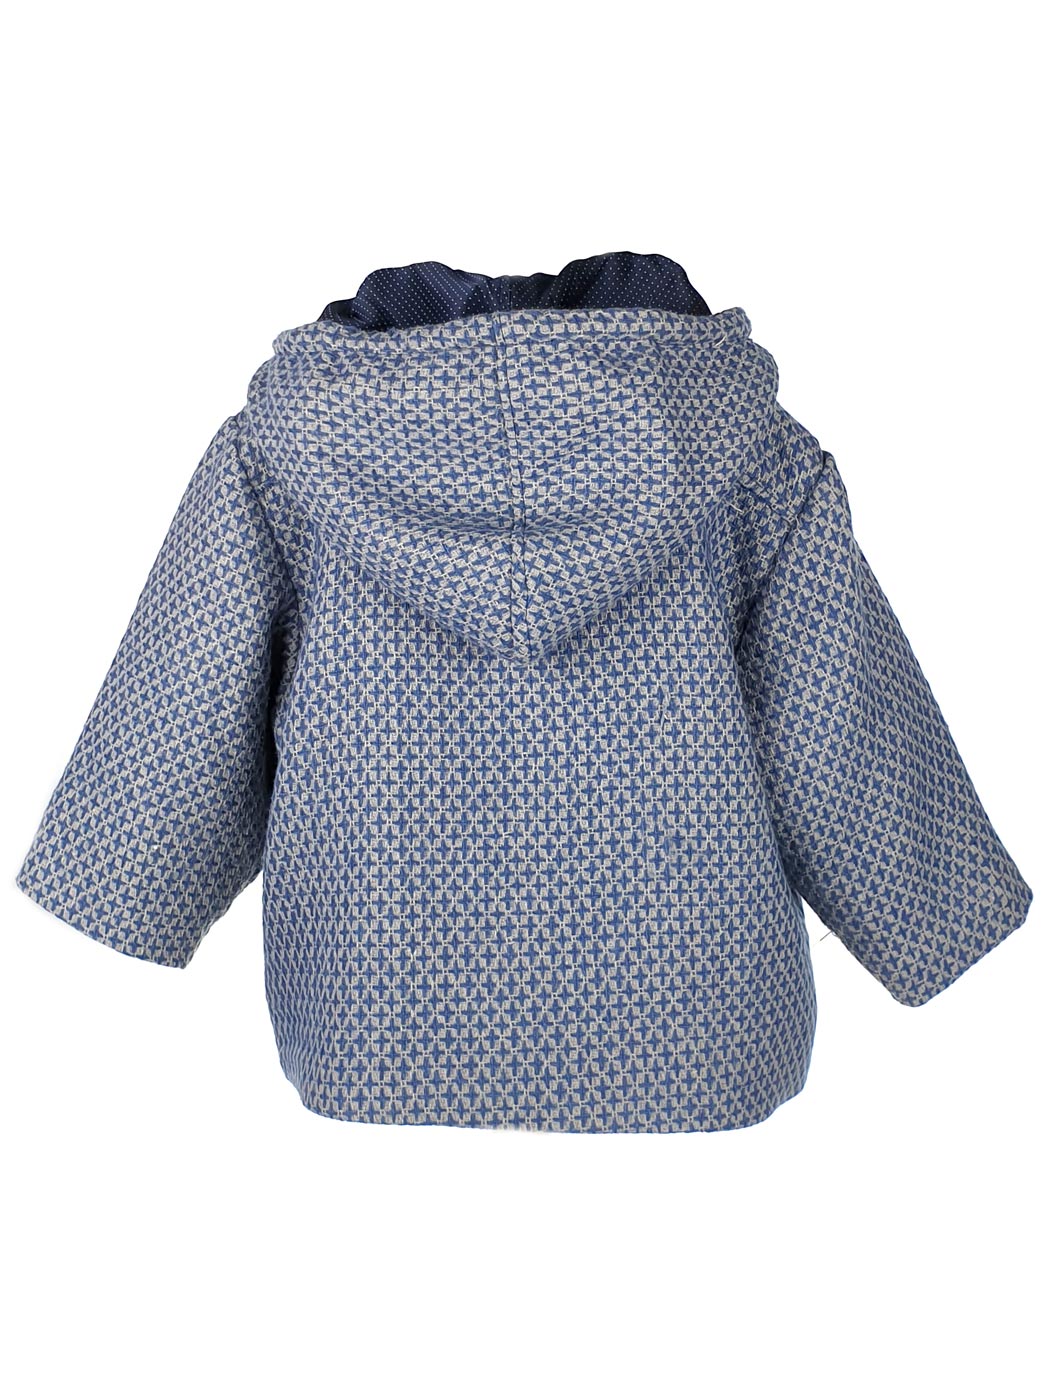 Boy's coat with checkered pattern - GERMAN Blue